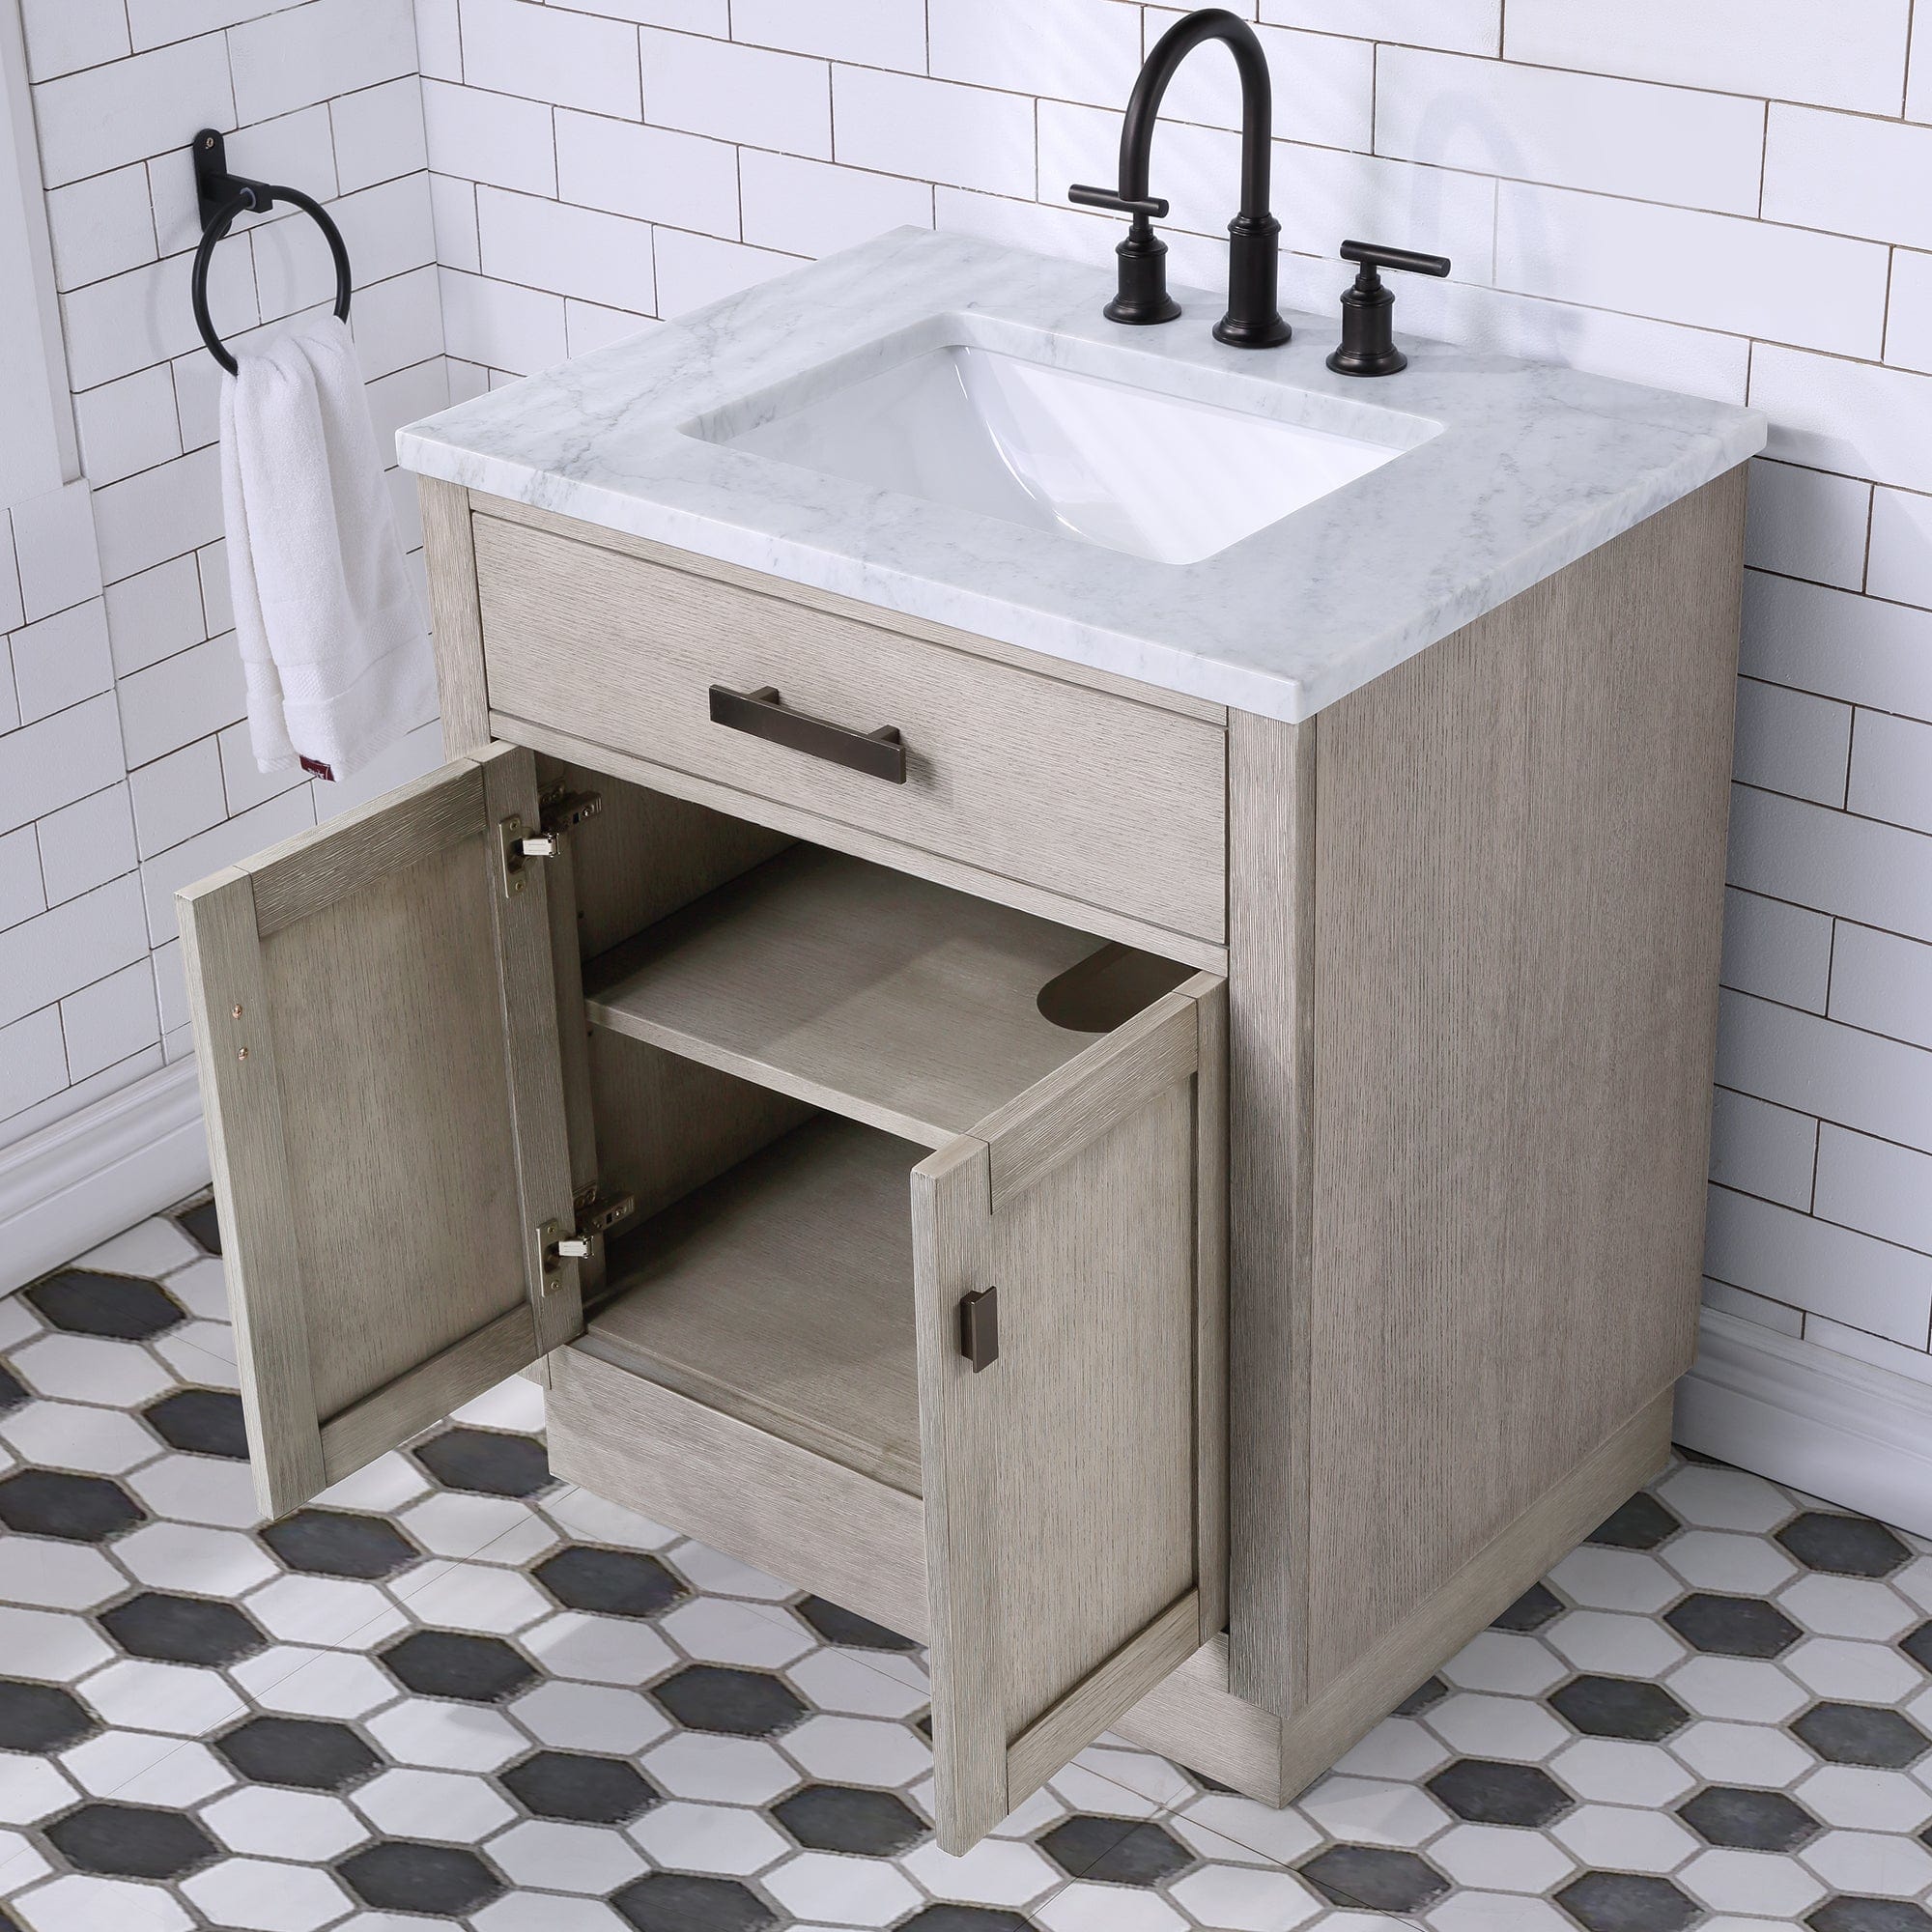 Chestnut 30 In. Single Sink Carrara White Marble Countertop Vanity In Grey Oak with Mirror - Molaix732030764637CH30CW03GK-R21000000